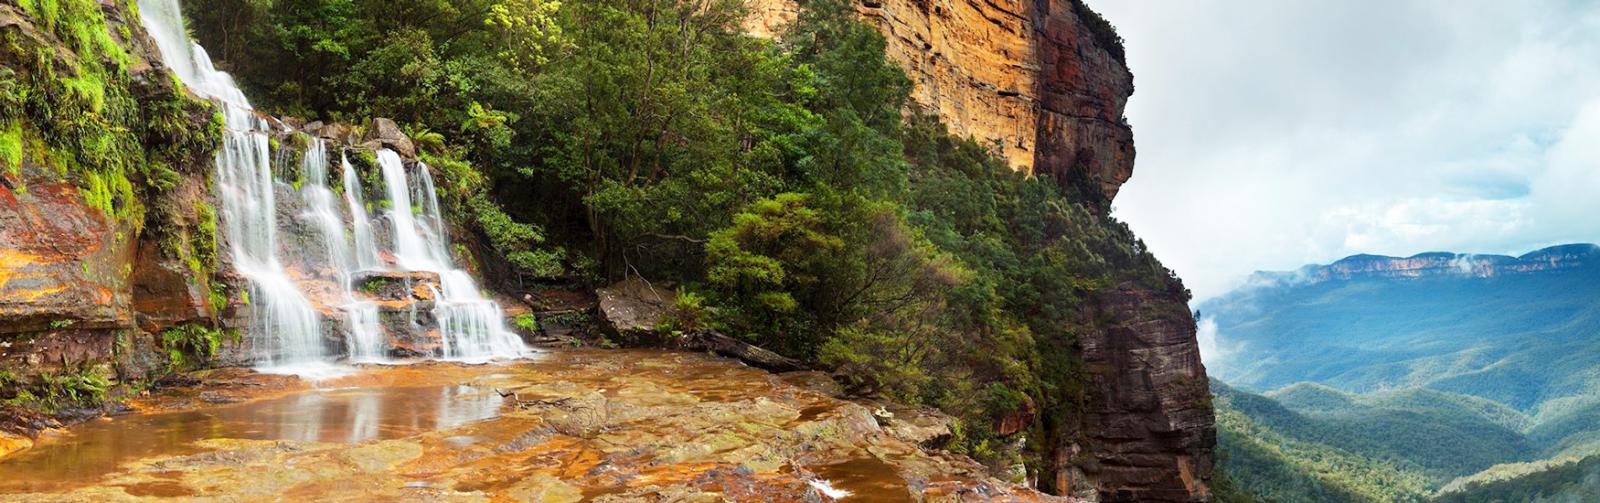 Sydney to the Blue Mountains Road Trip Itinerary